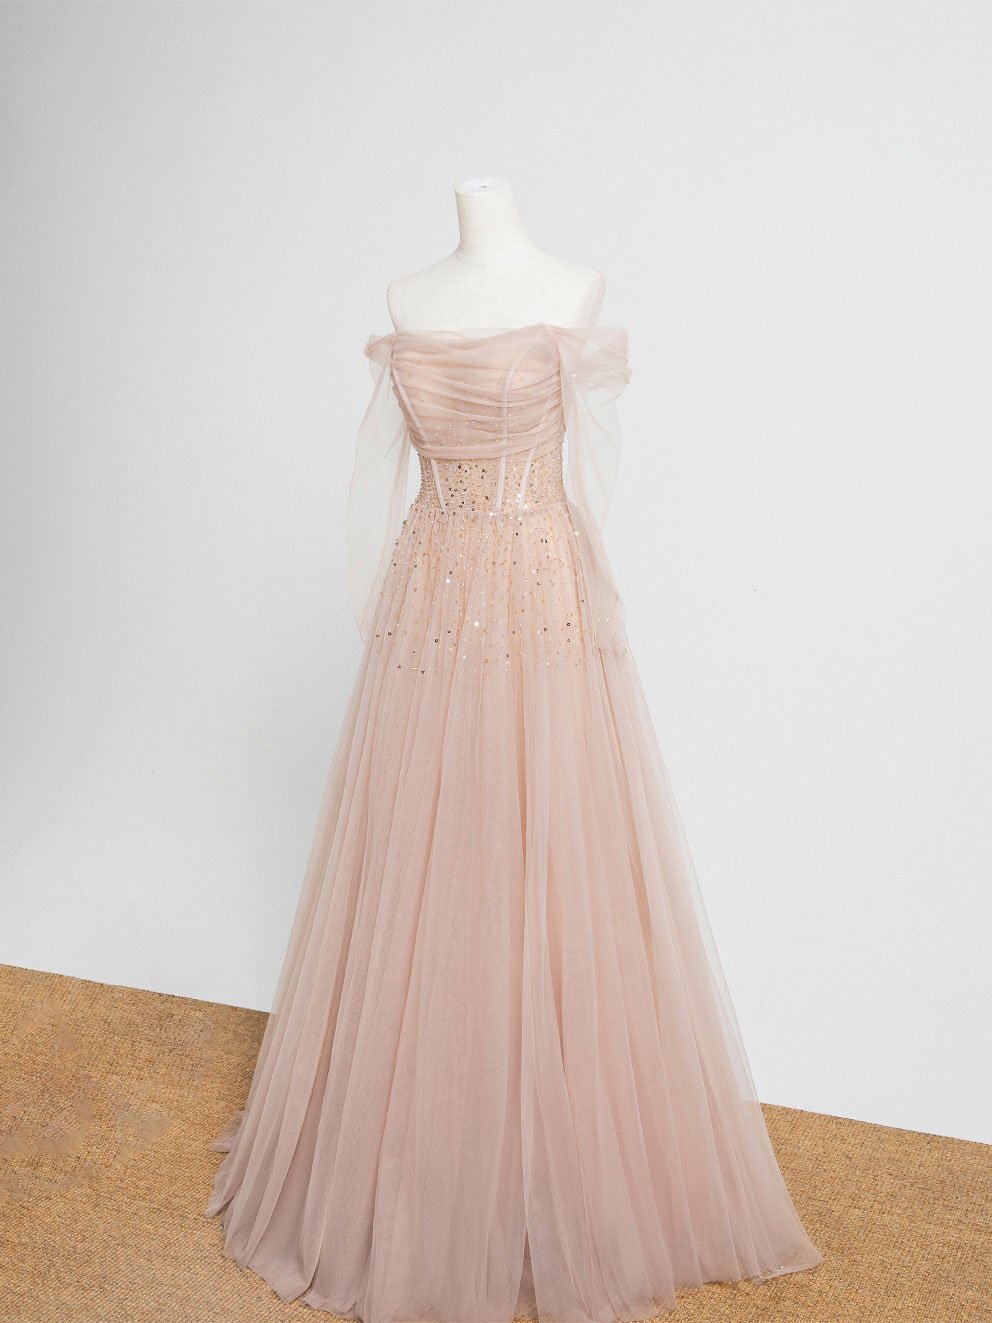 Prom Dress Princesses, Champagne Pink Tulle Beads Long Prom Dress, Champagne Evening Dress